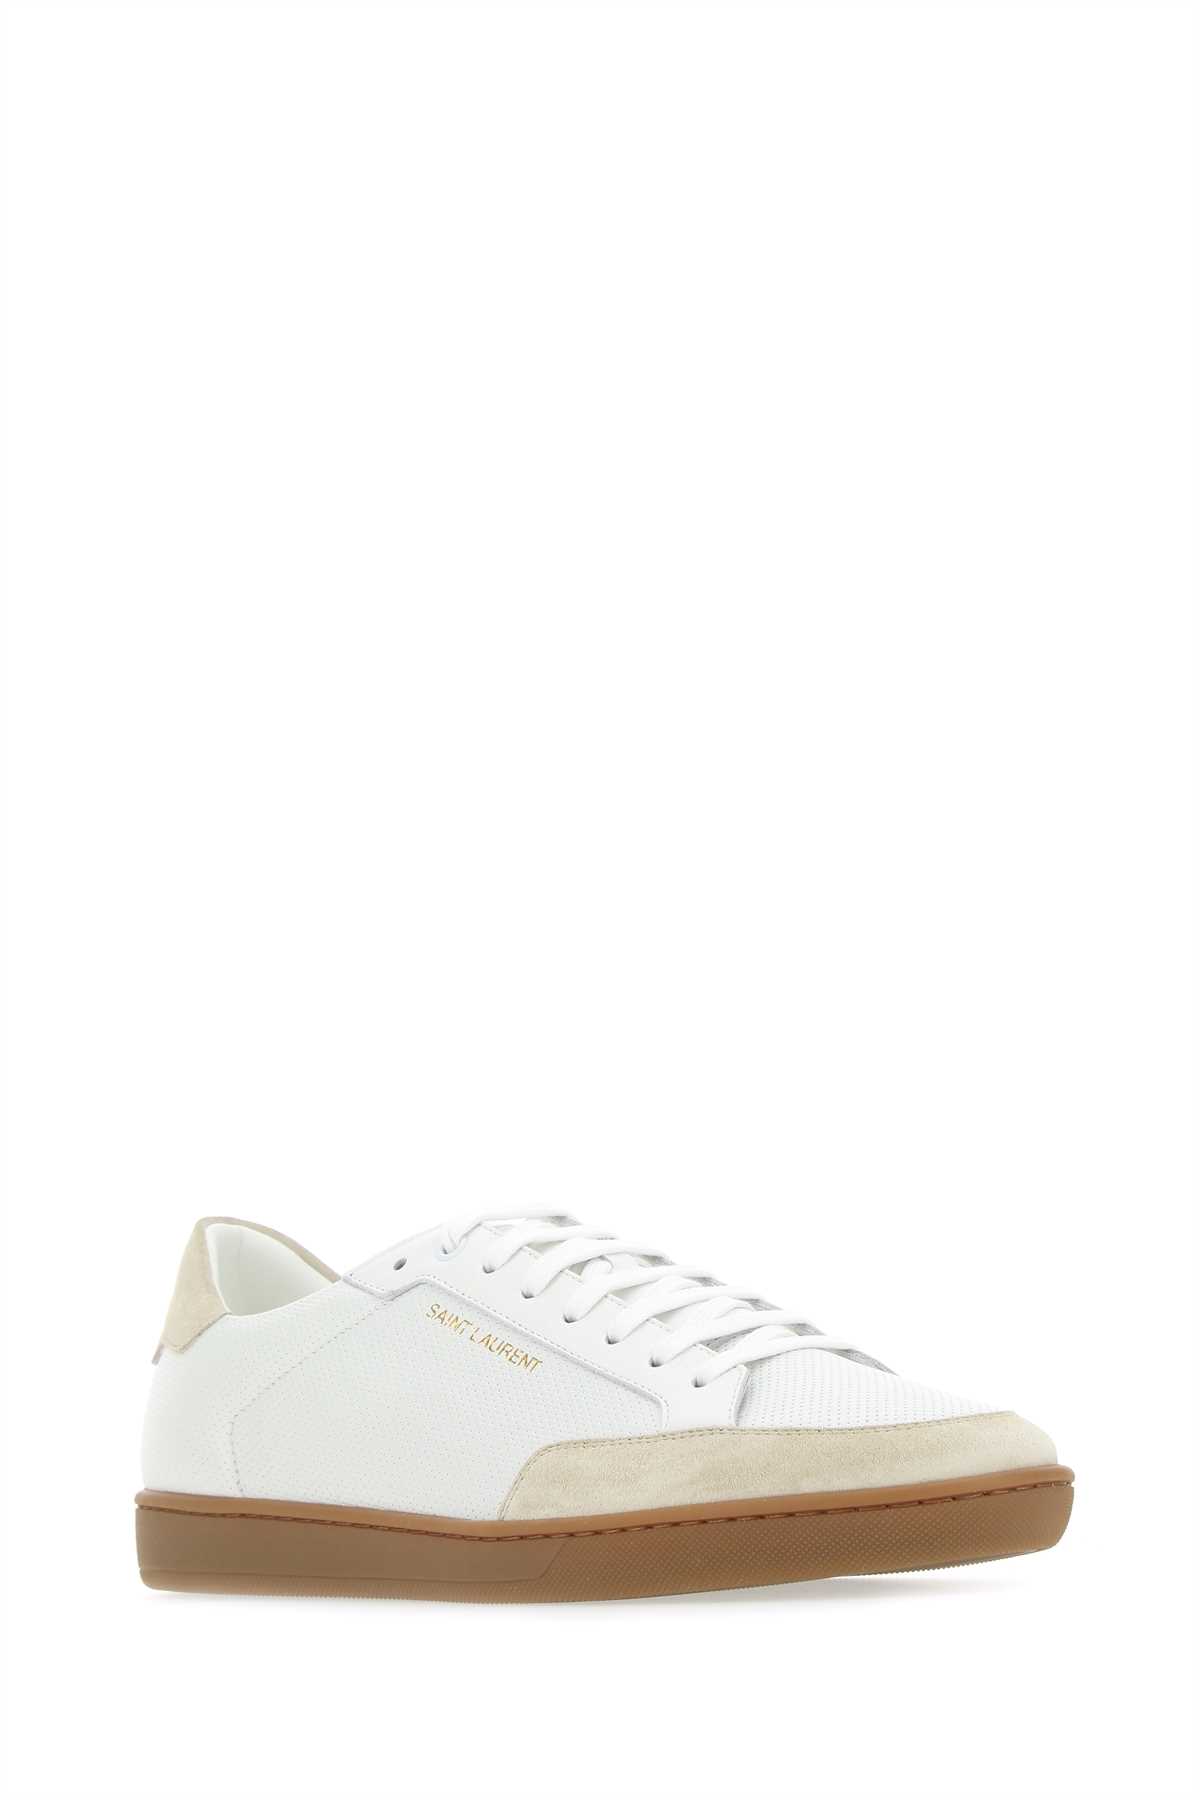 Saint Laurent White Leather Sneakers In Blopblopblopan